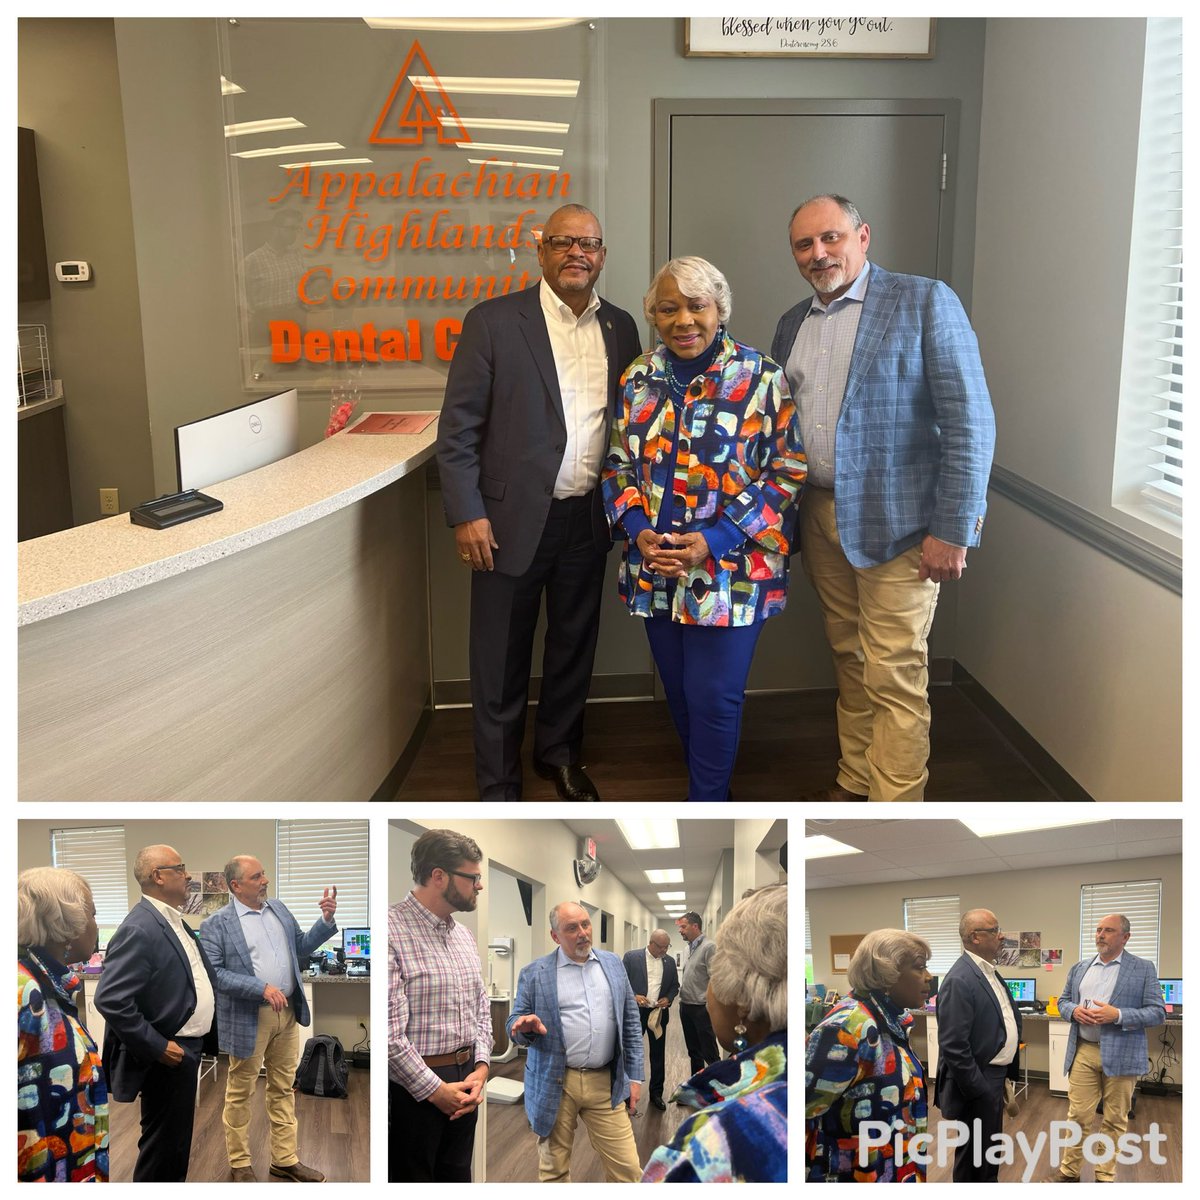 The last stop of the day for our #VirginiaFamiliesFirst budget tour took place at the Appalachian Highlands Community Dental Center in Abingdon. The goal is to help those who need it most in #SWVA. It provides affordable oral healthcare to underserved and uninsured families. #VFF